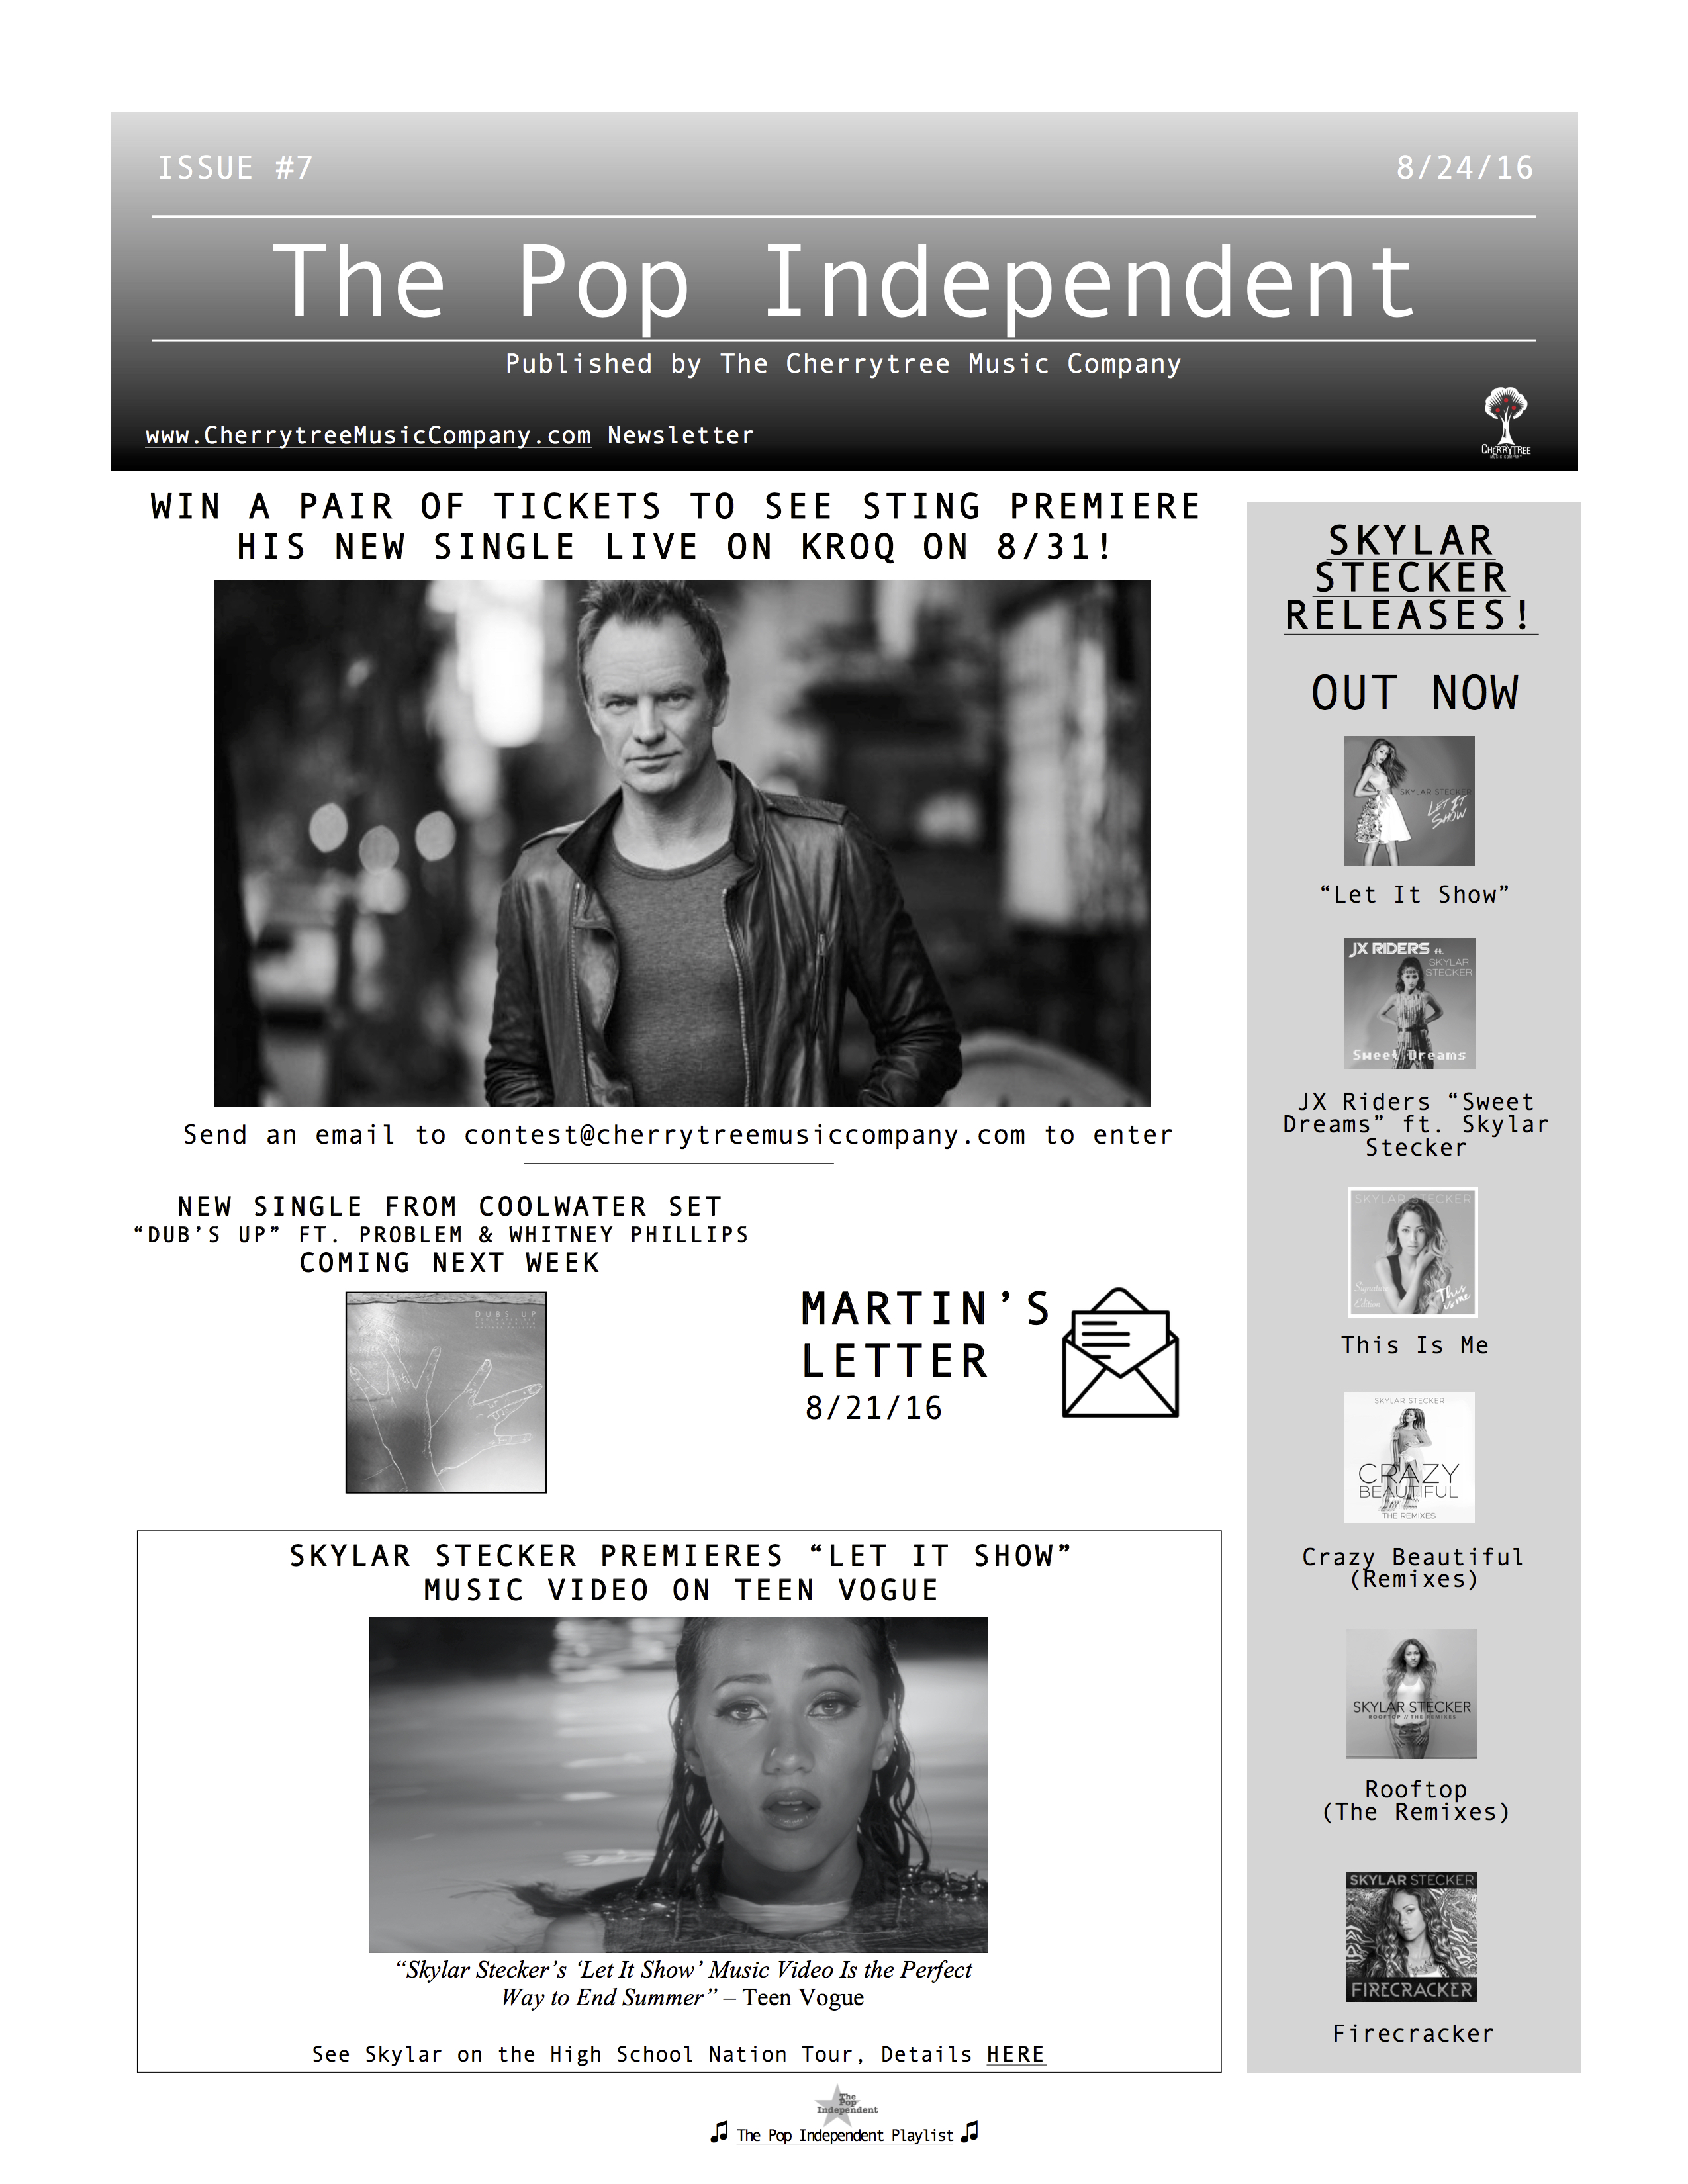 The Pop Independent, issue 7